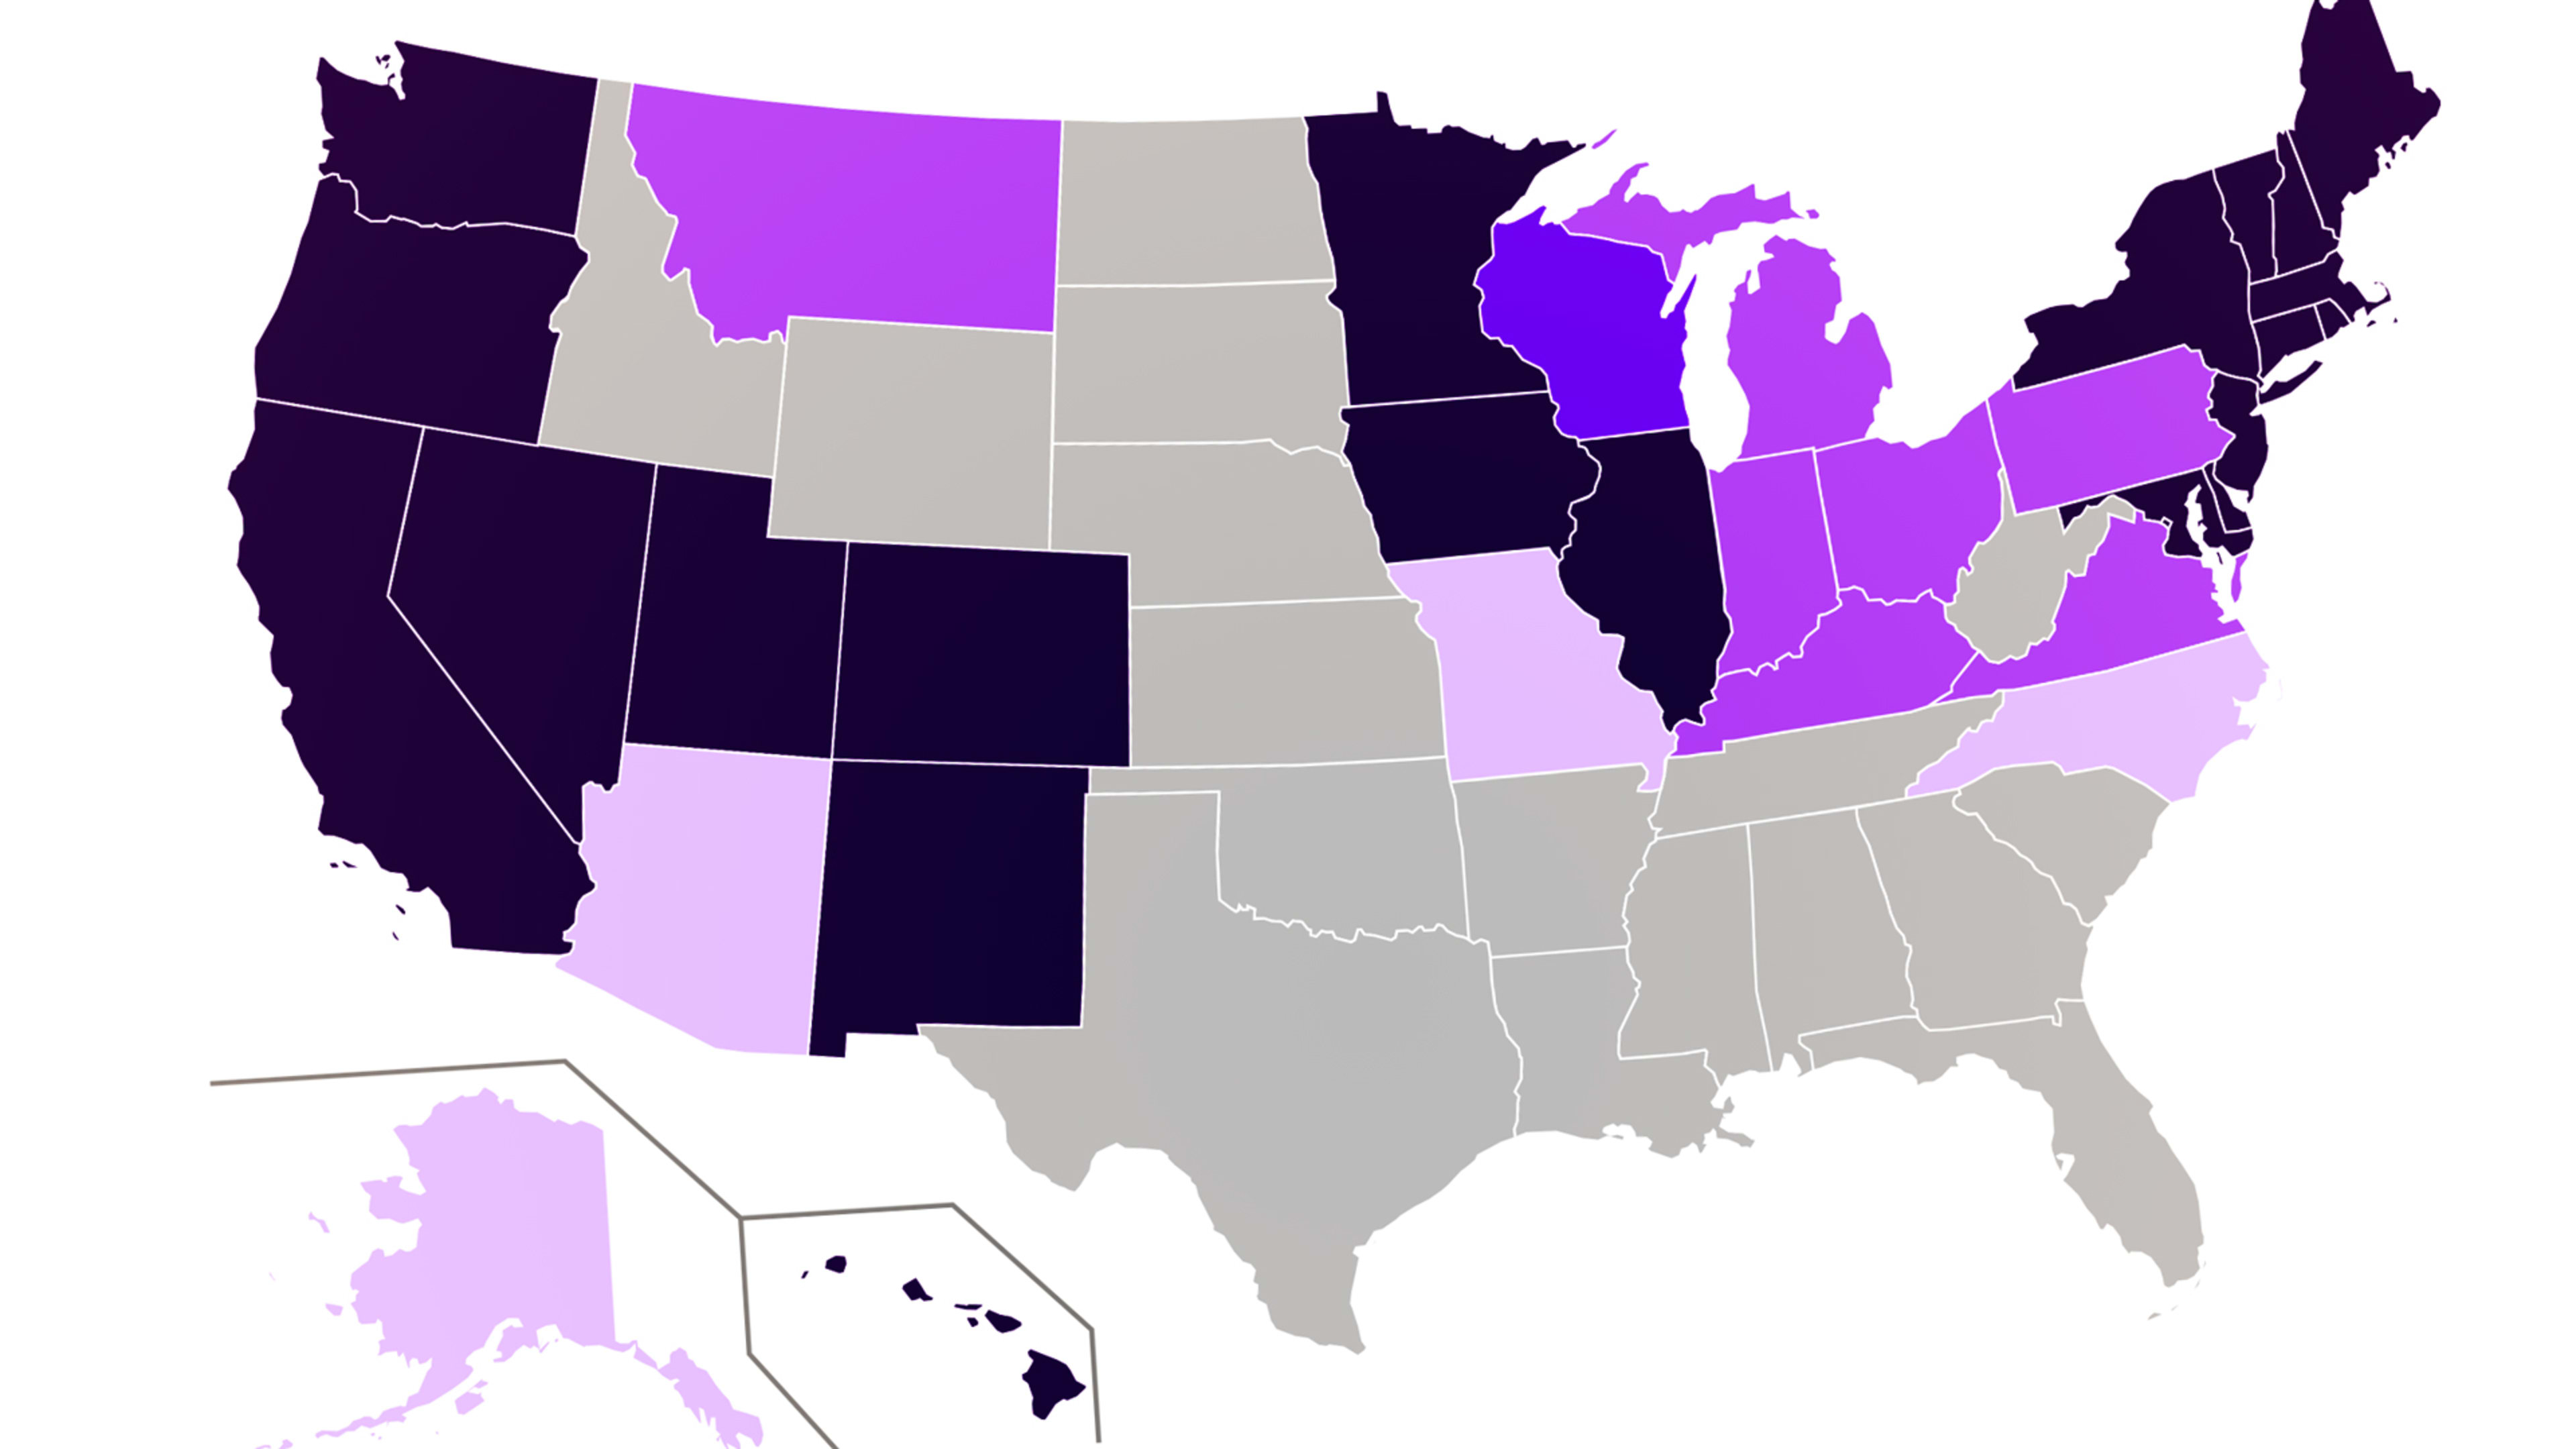 It’s 2019, and your boss can still fire you for being gay in these states